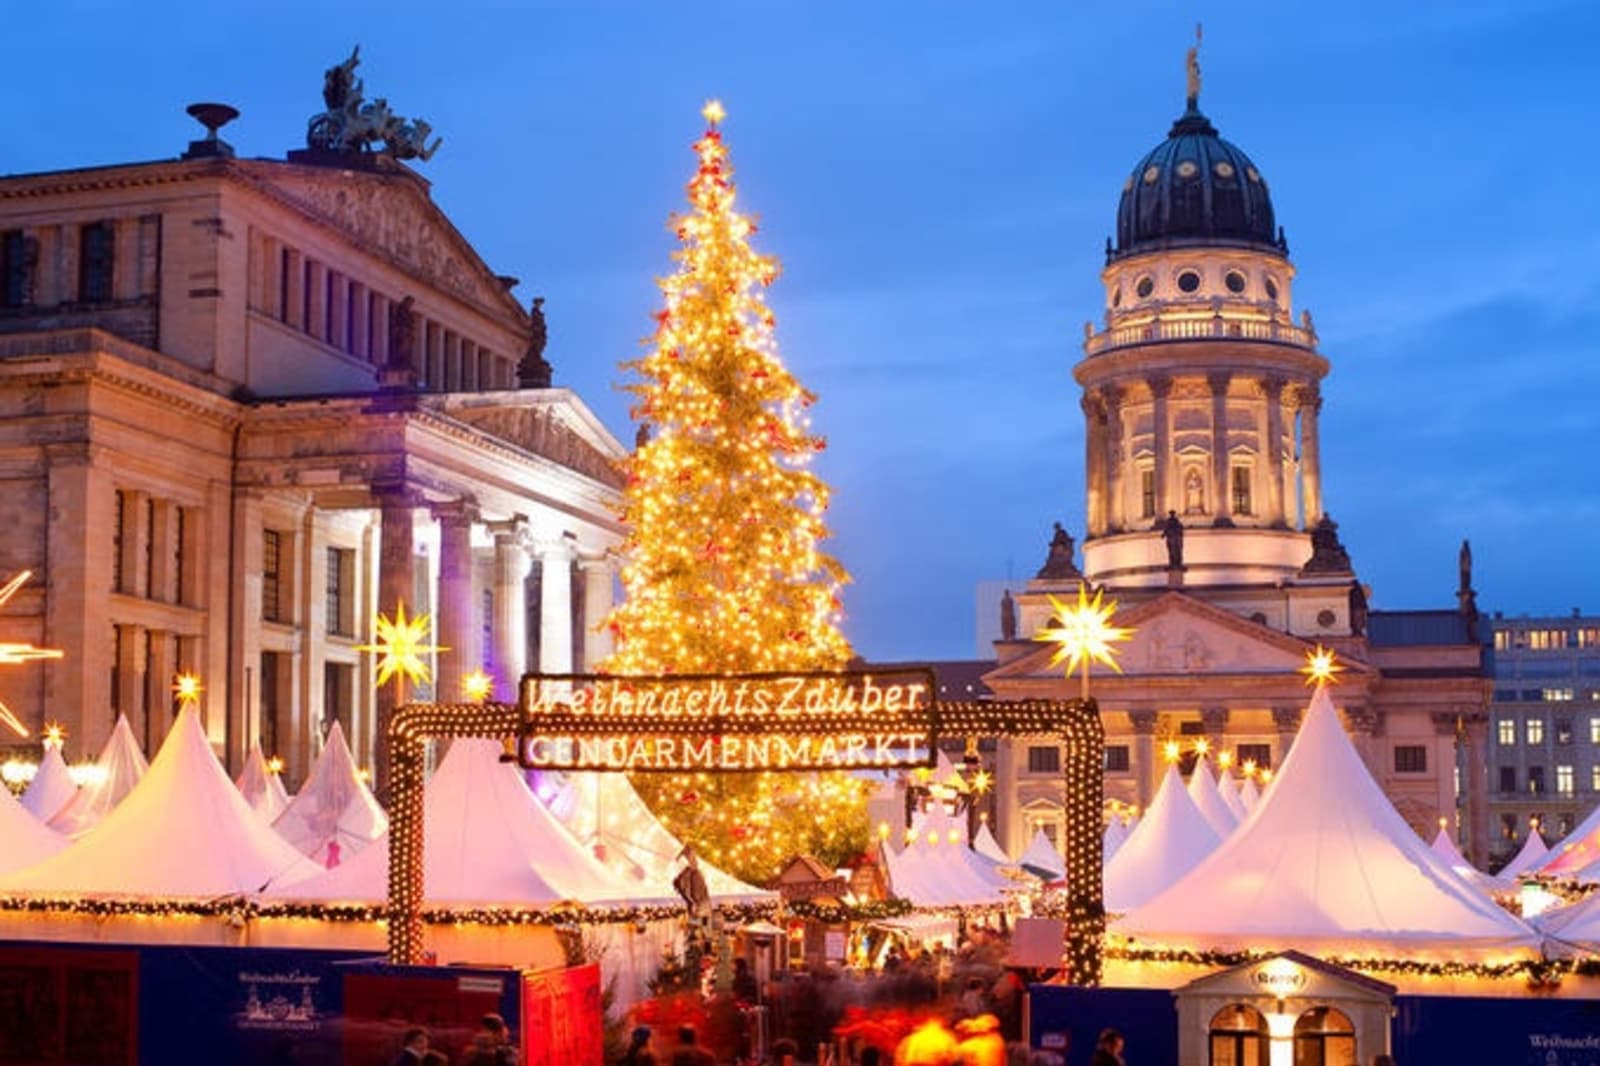 rs-5-wheres-safe-to-travel-berlin-christmas-markets-gettyimages-87126983.jpg